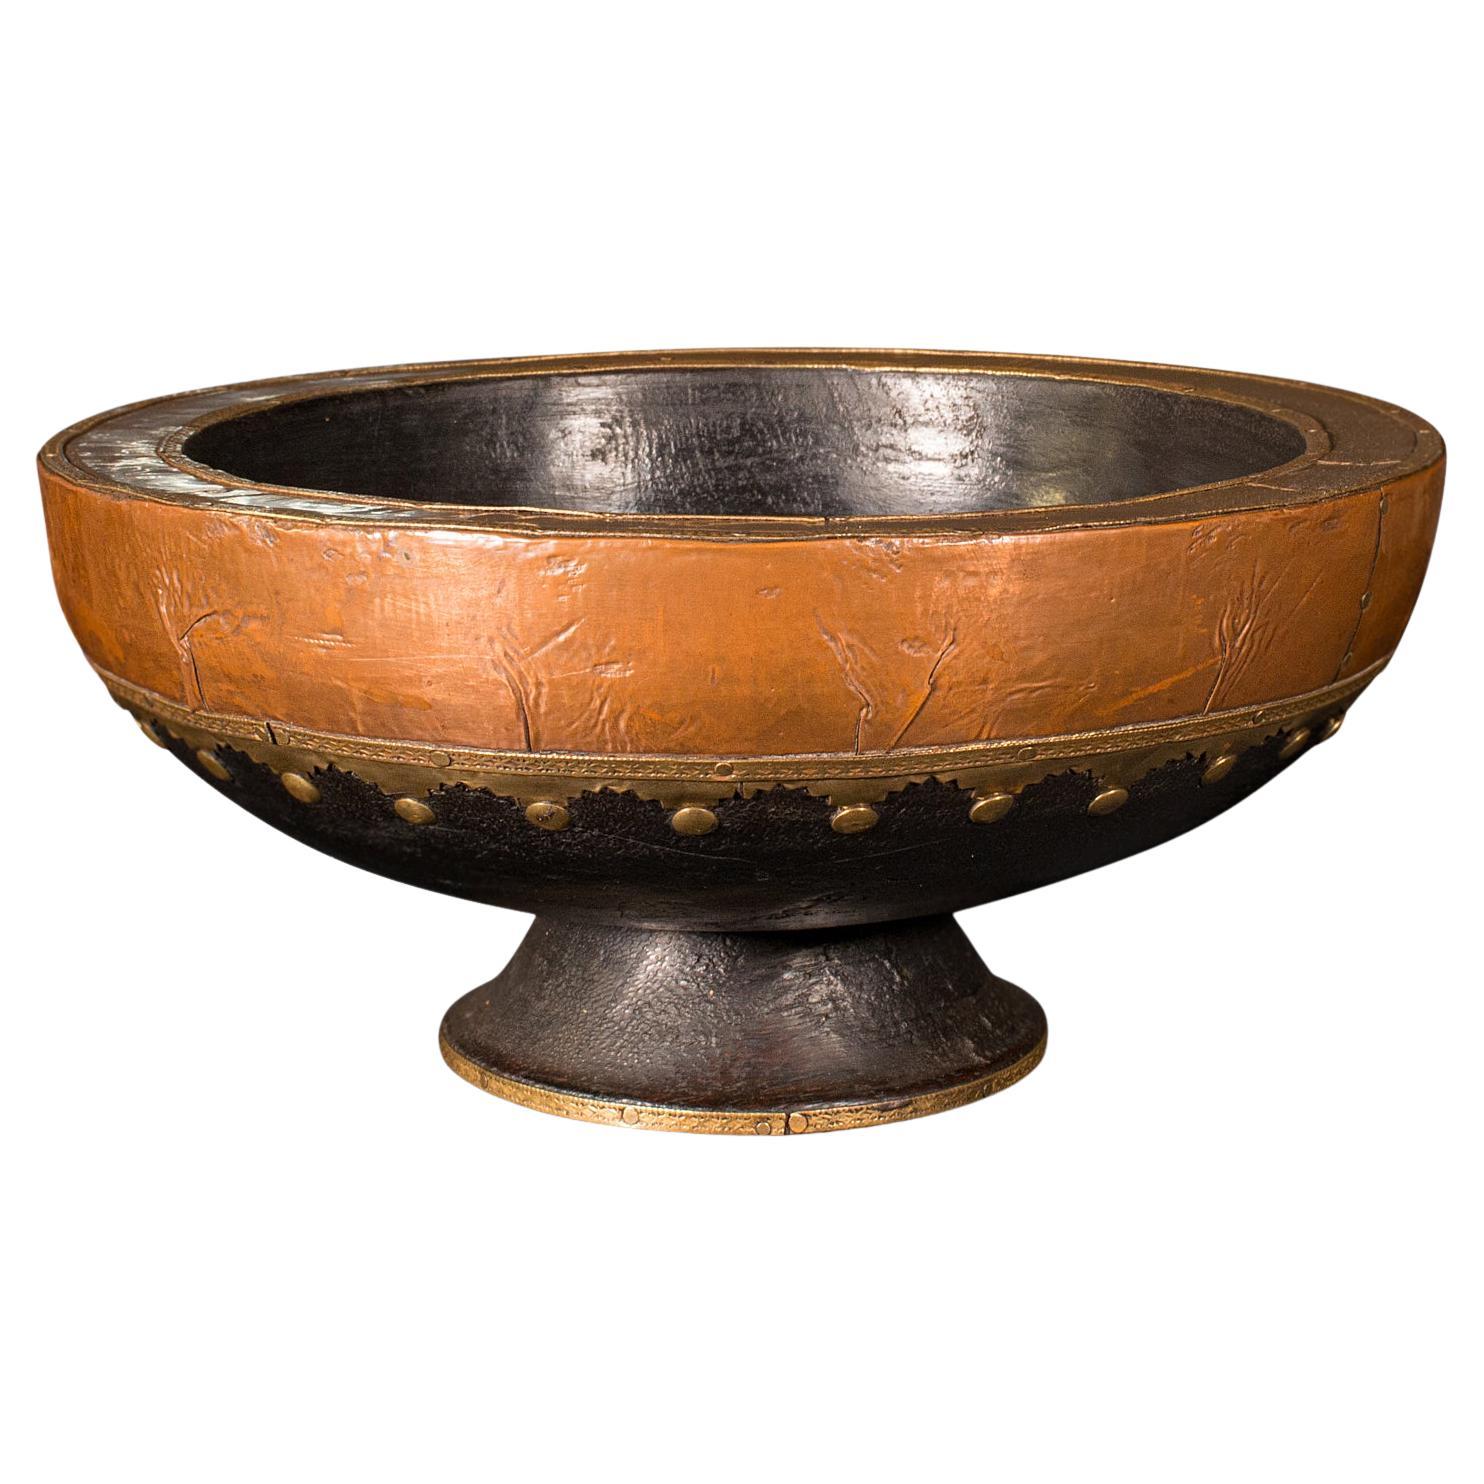 Antique Ceremonial Bowl, Indian, Ebonised, Dish, Brass, Copper, Decor, Victorian For Sale